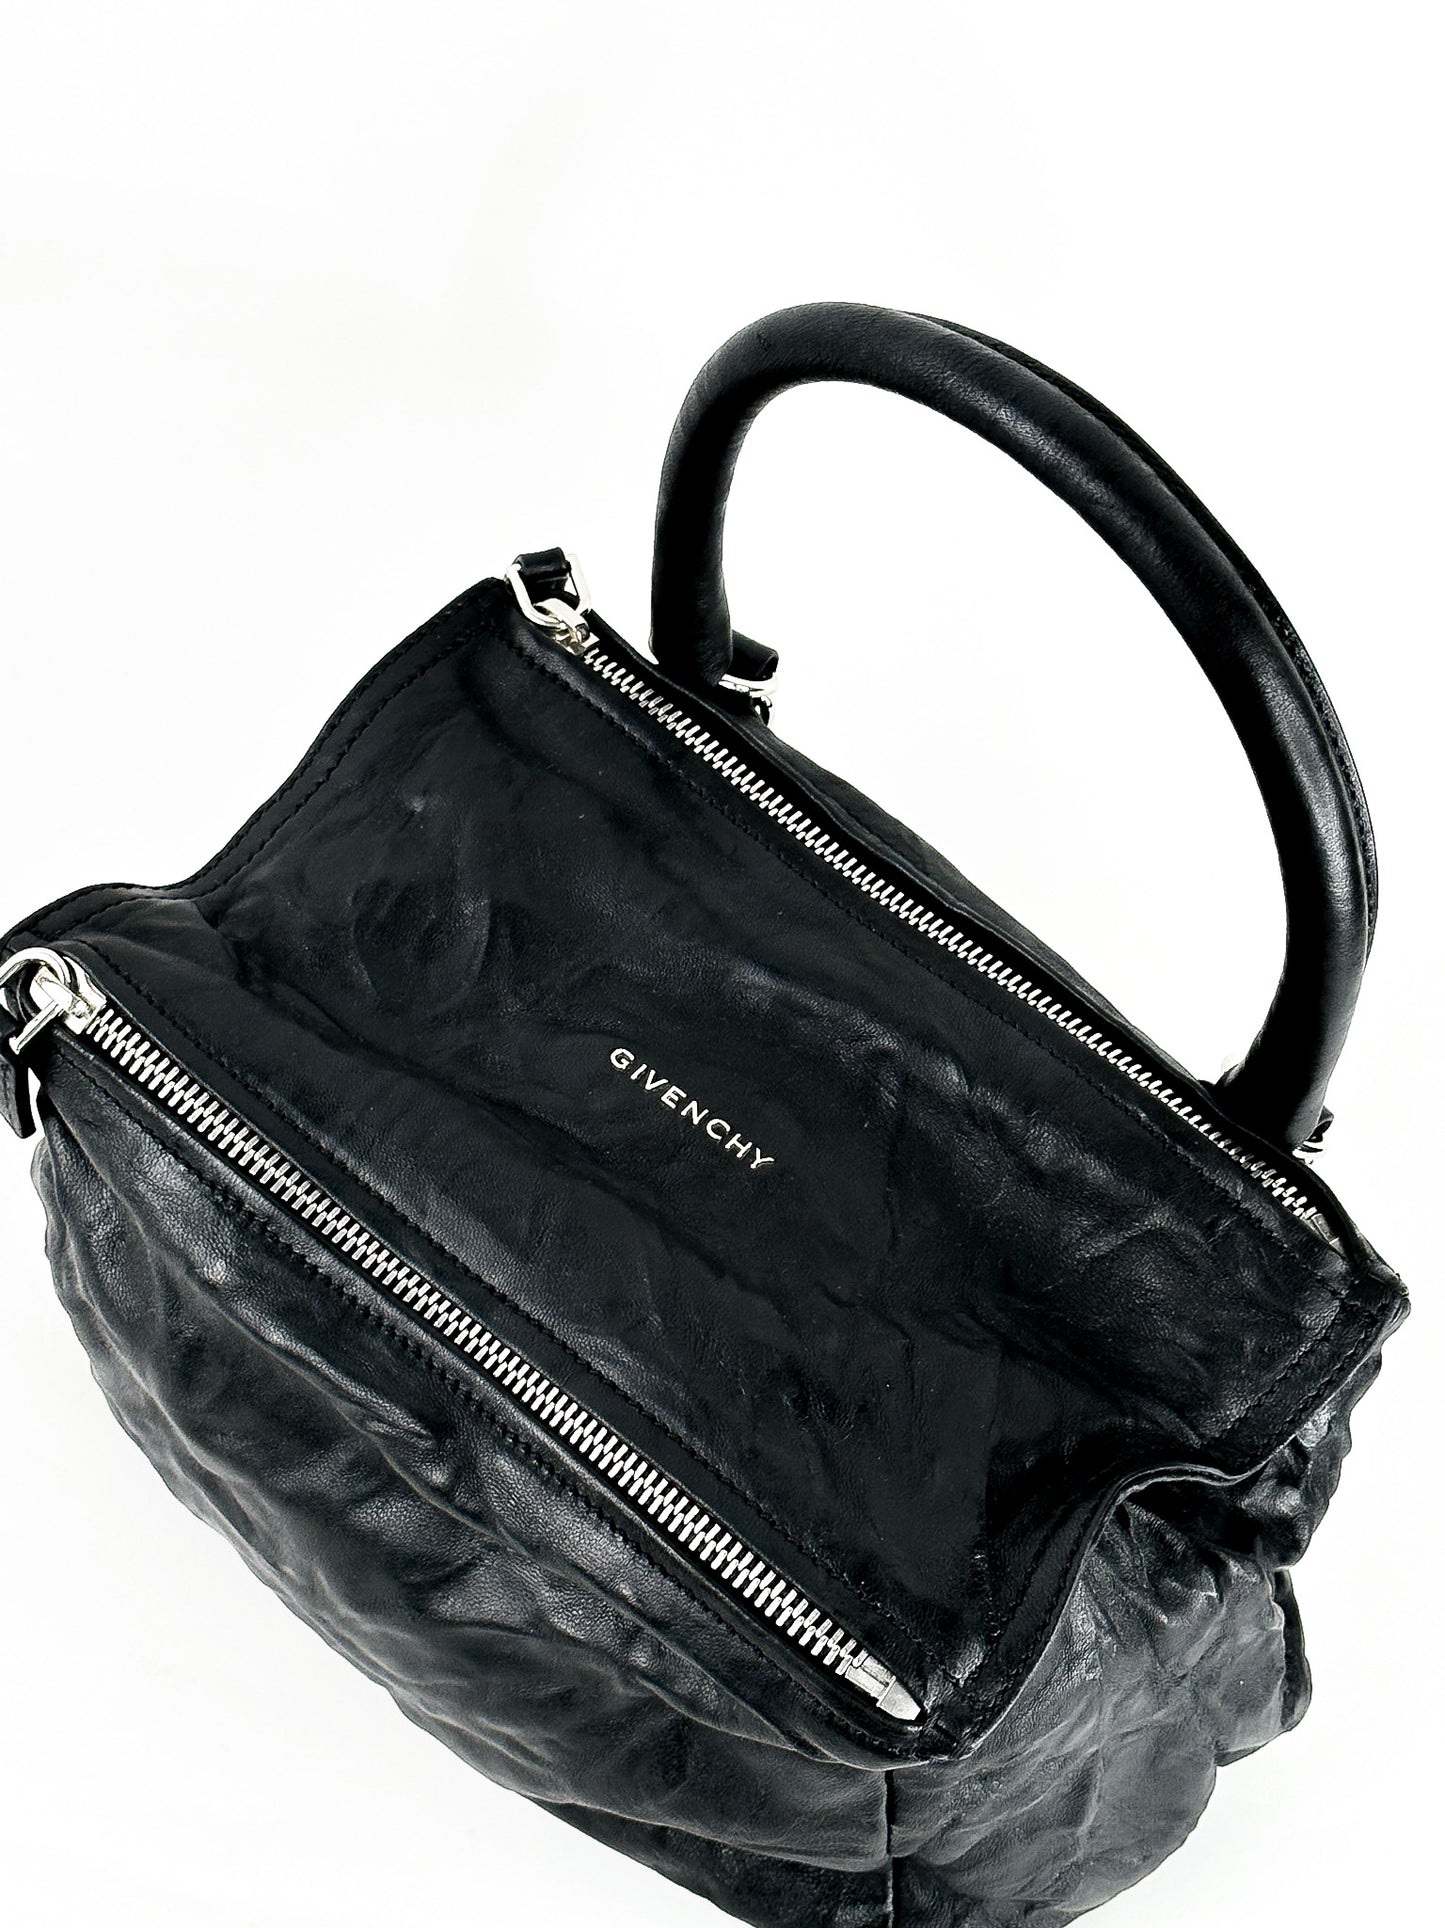 Givenchy Pandora Aged Leather Small